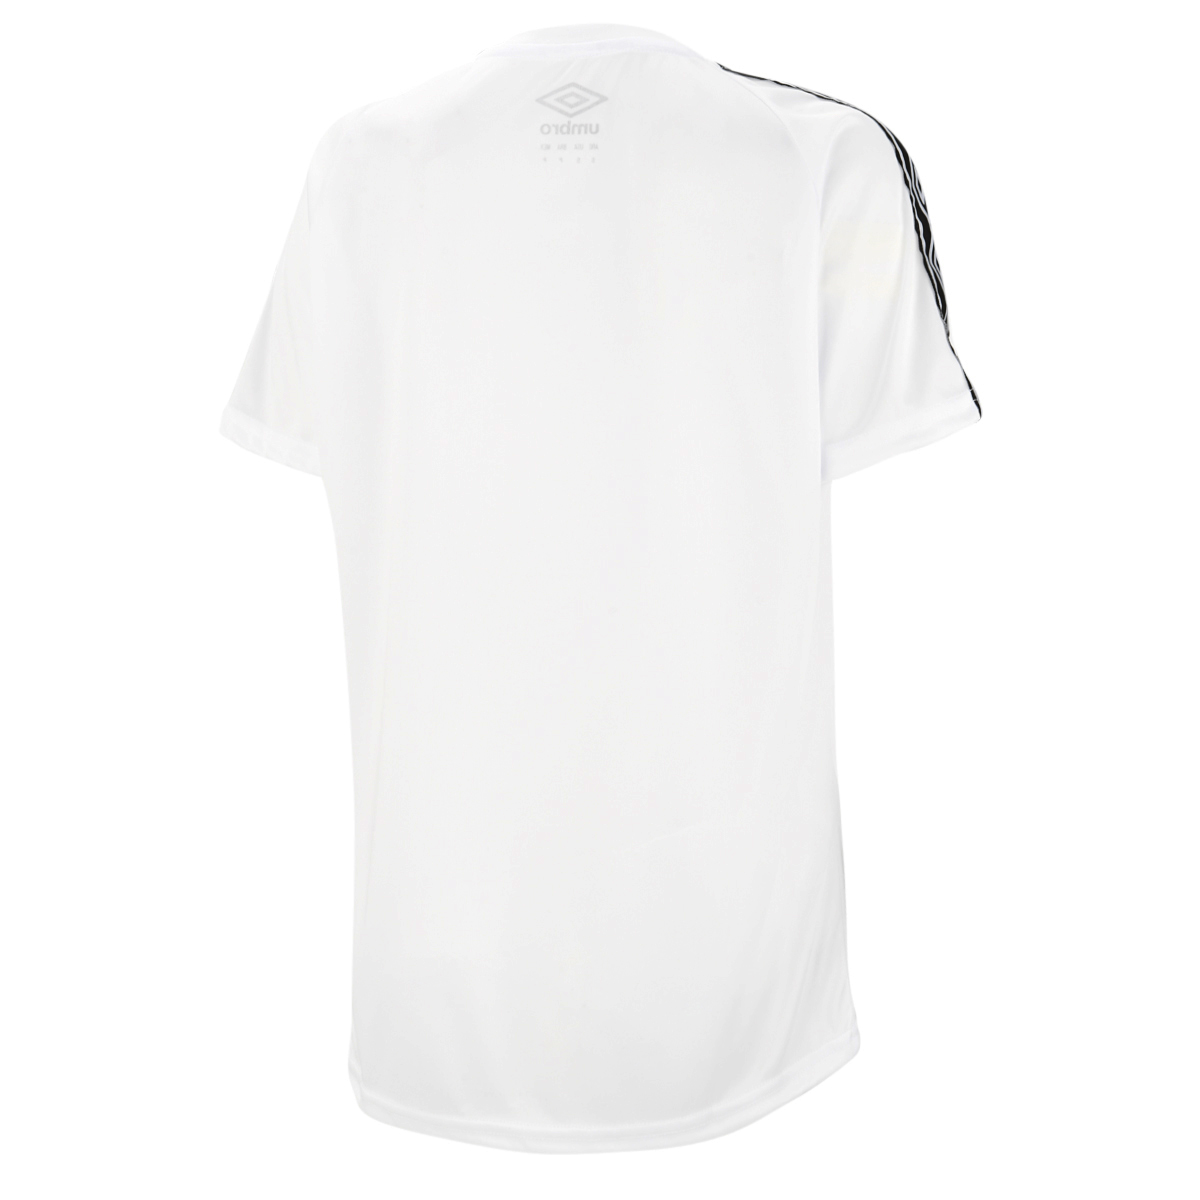 Remera Entrenamiento Umbro Galon Mujer,  image number null